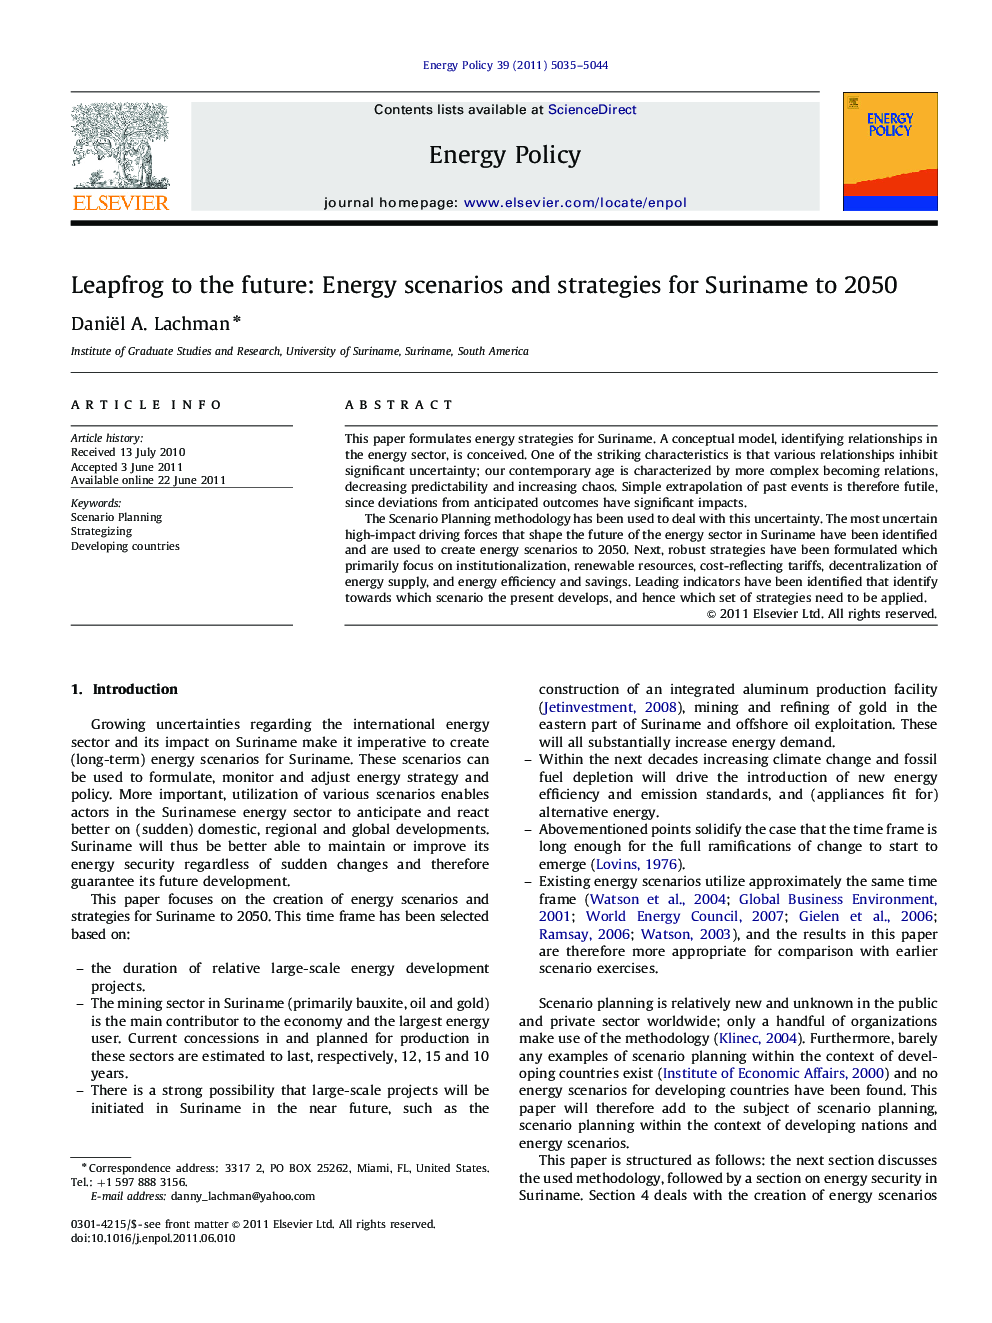 Leapfrog to the future: Energy scenarios and strategies for Suriname to 2050